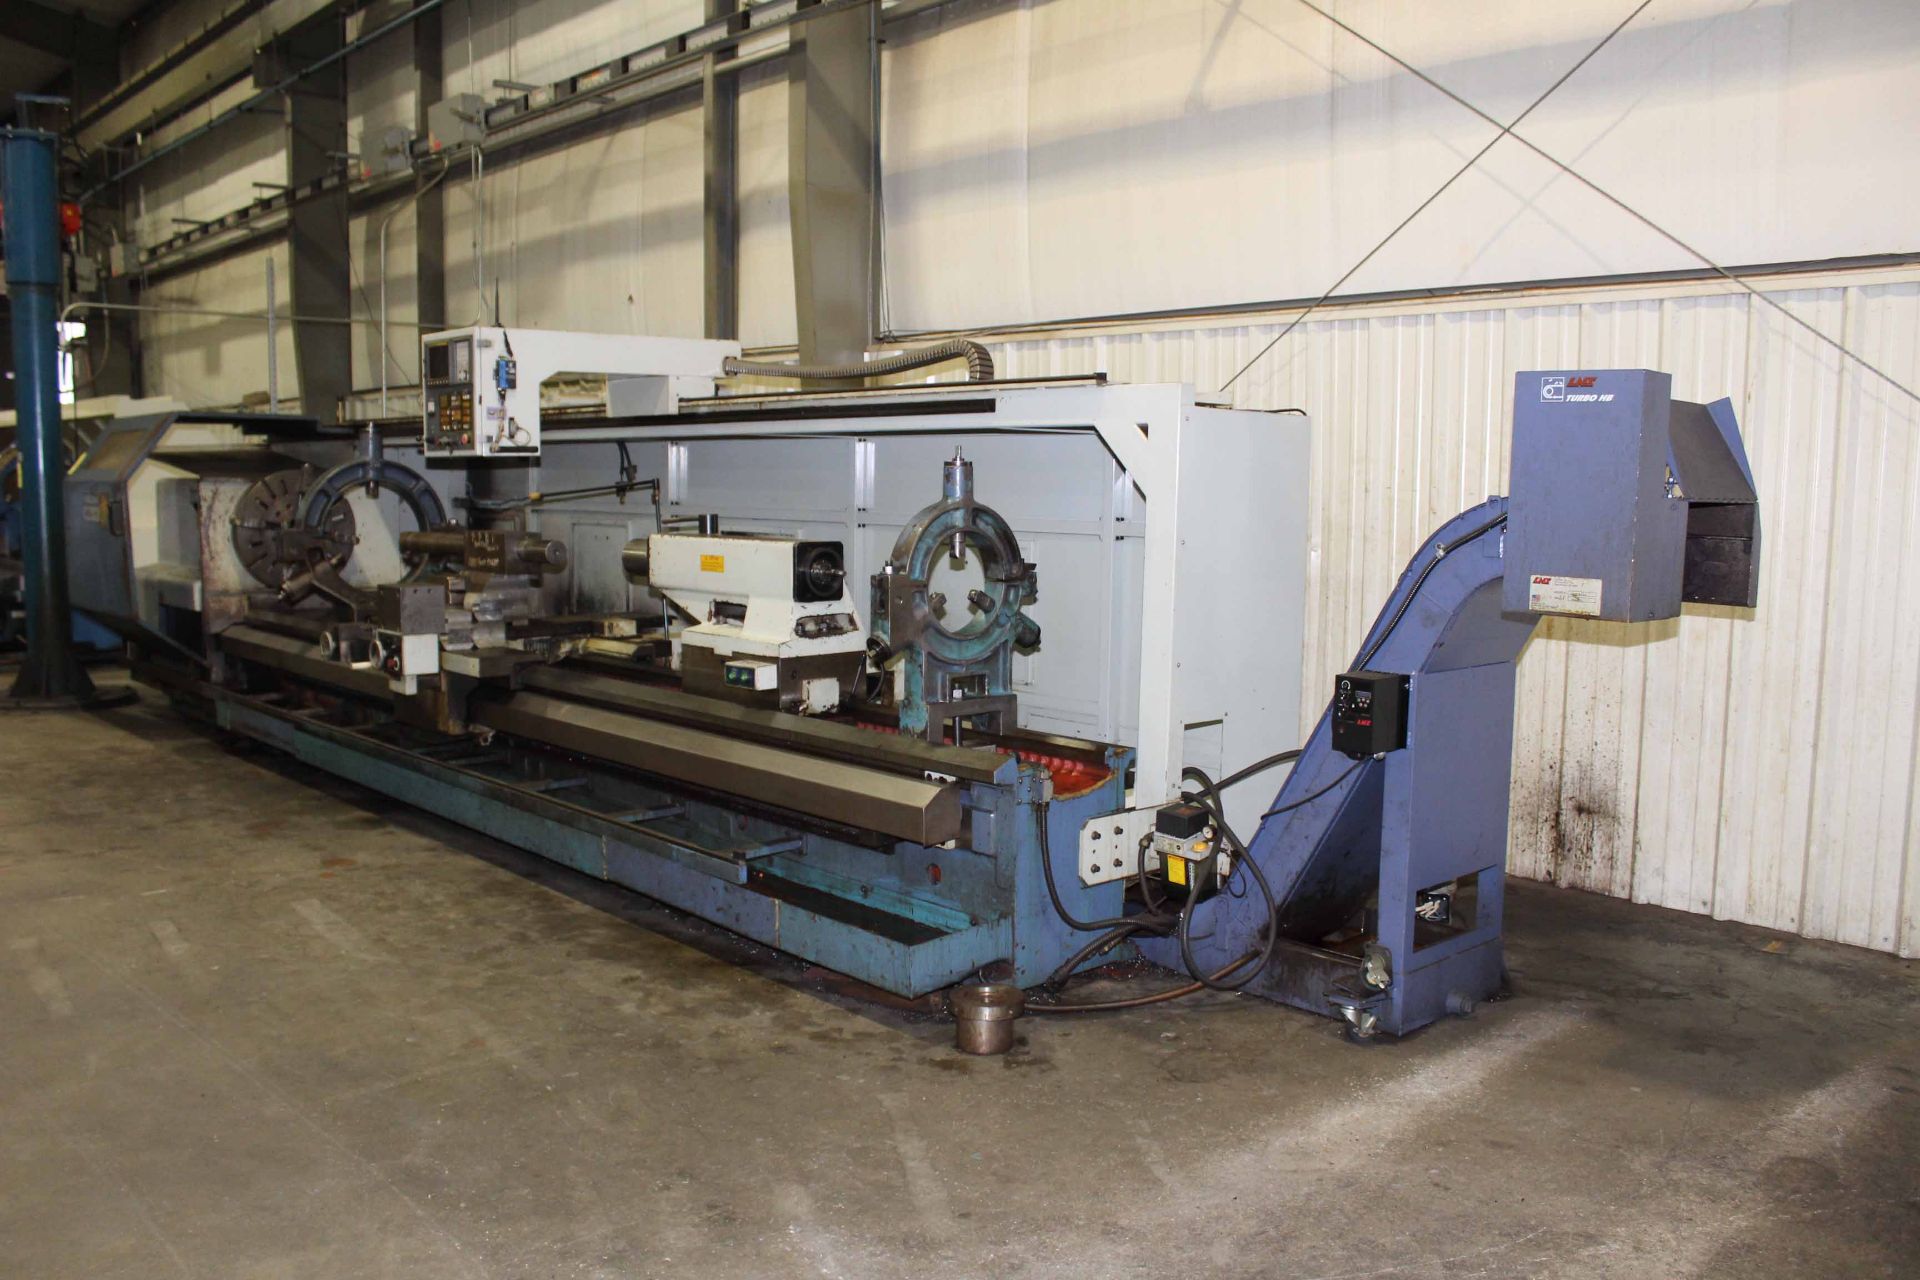 CNC HOLLOW SPINDLE FLATBED LATHE, HWACHEON MDL. MEGA 95, new 12/1999, Fanuc 21-T CNC control, 38. - Image 2 of 2